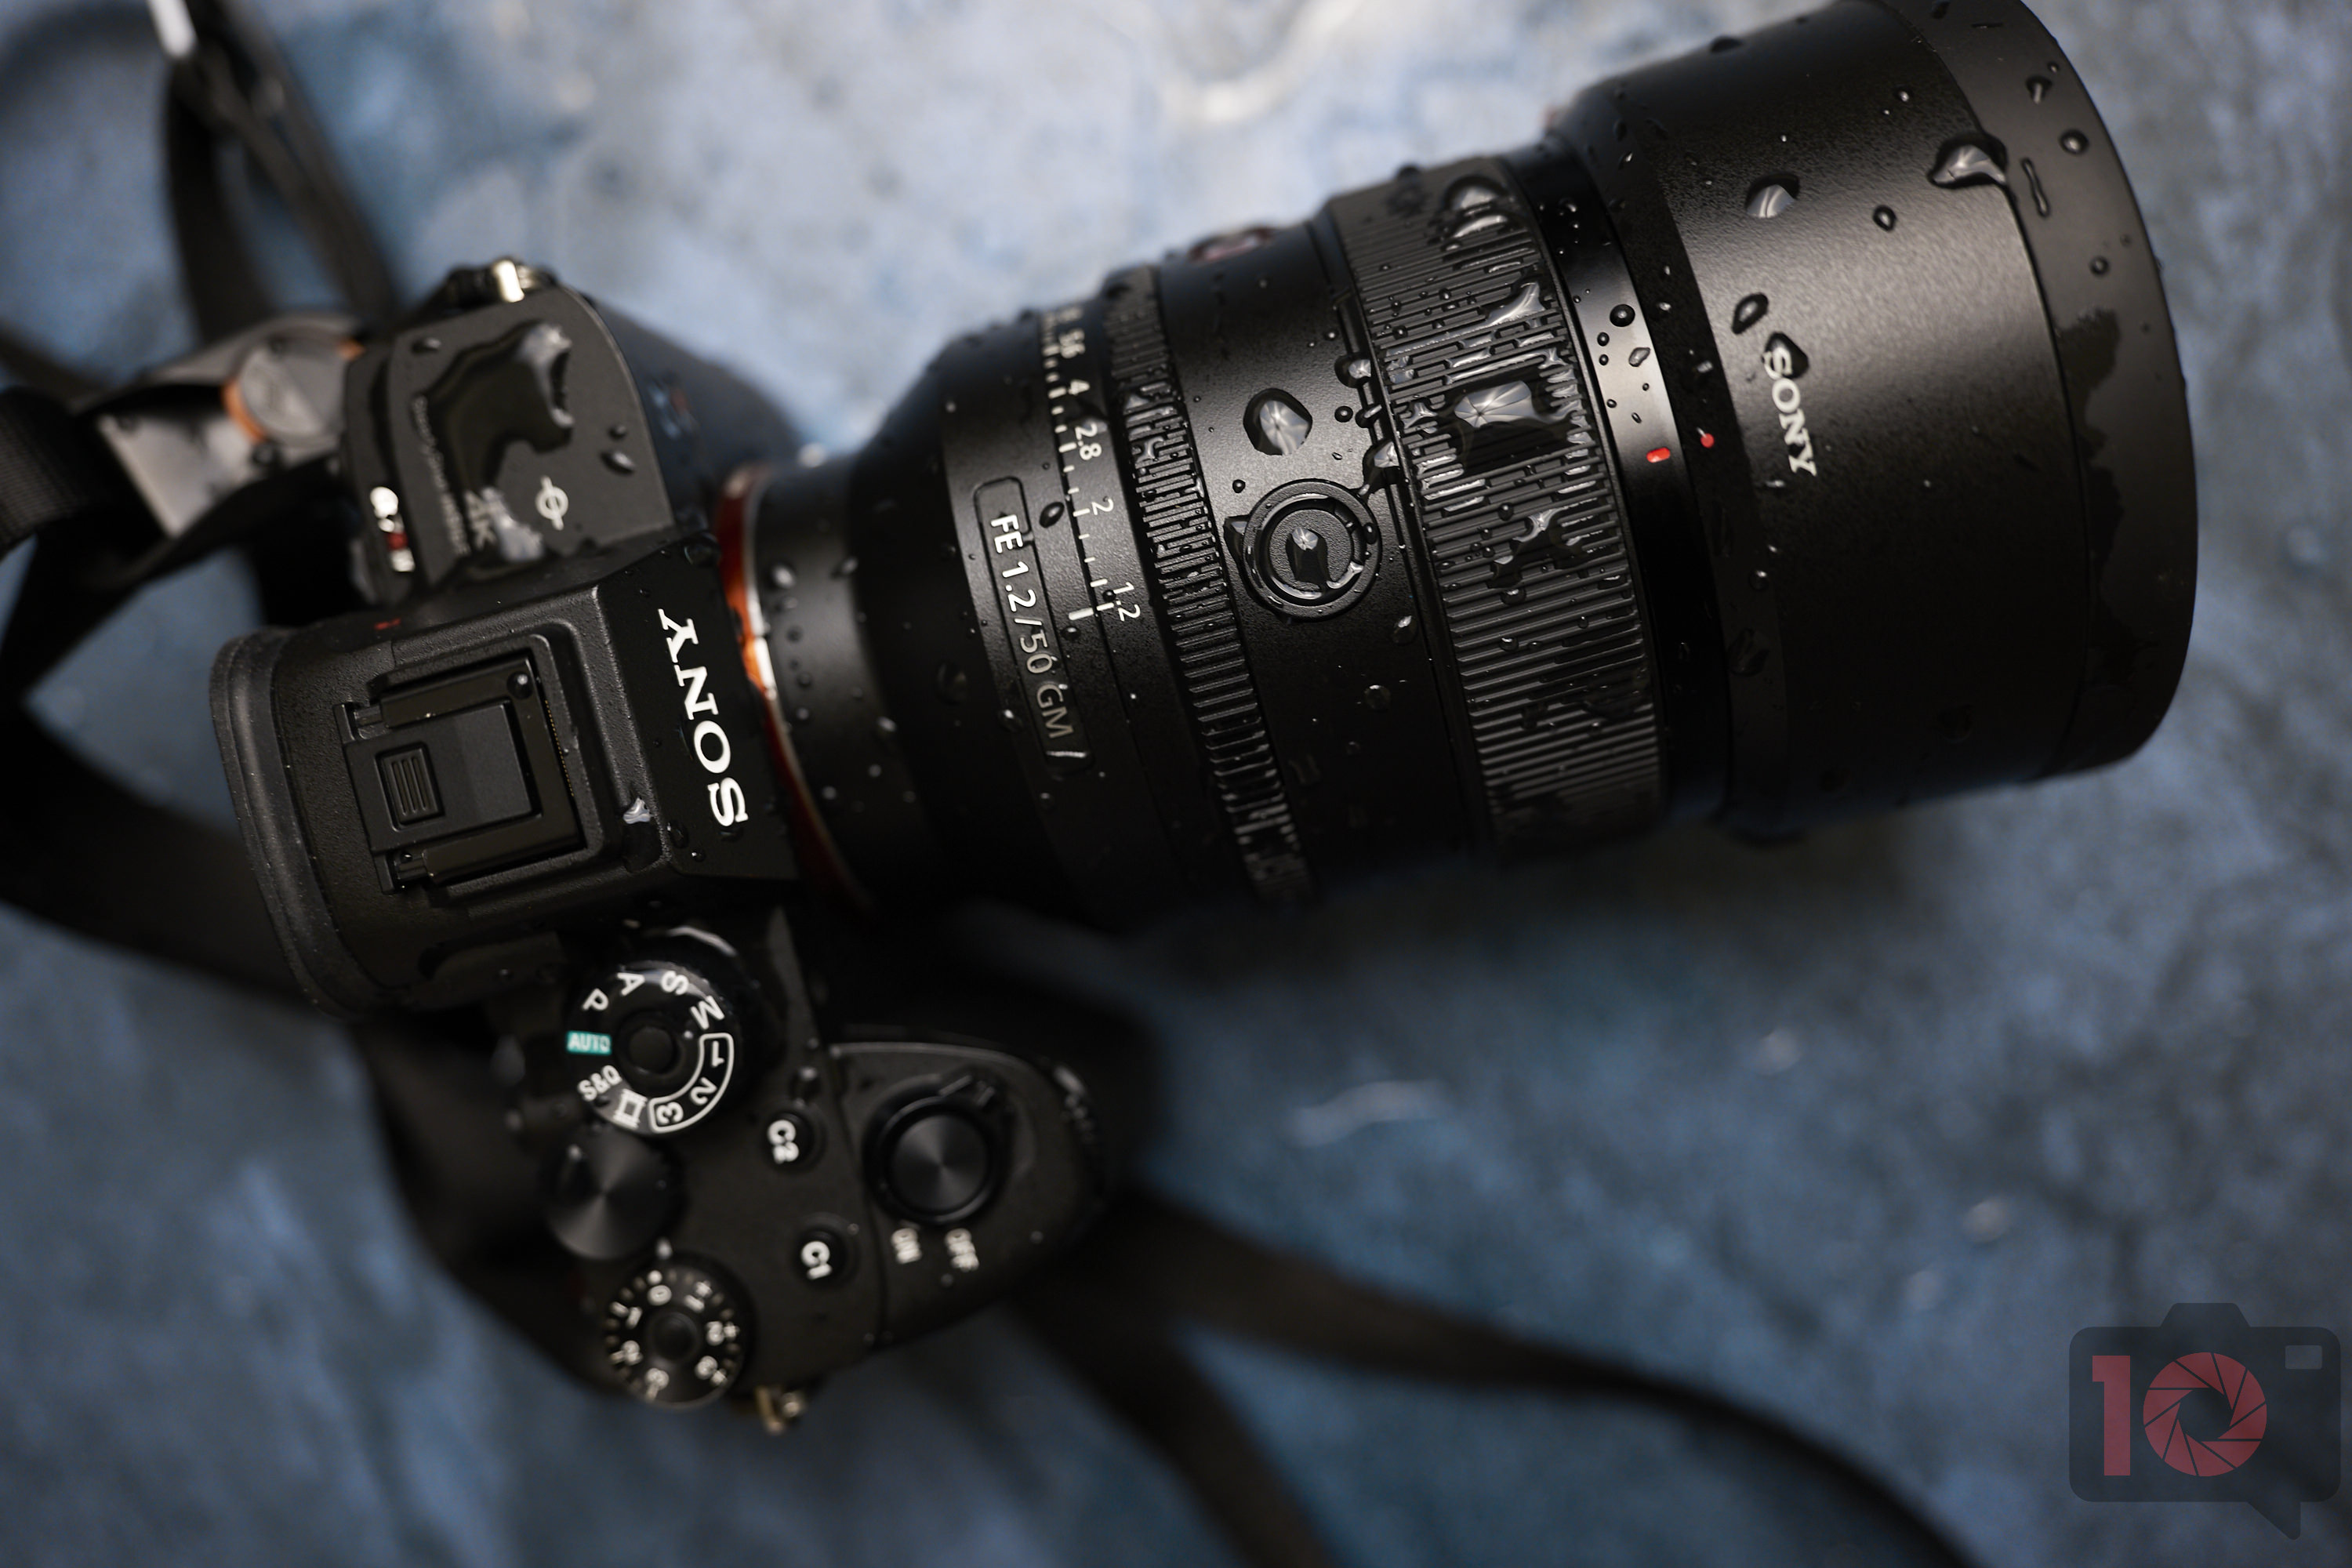 Sony FE 50mm f1.8 review